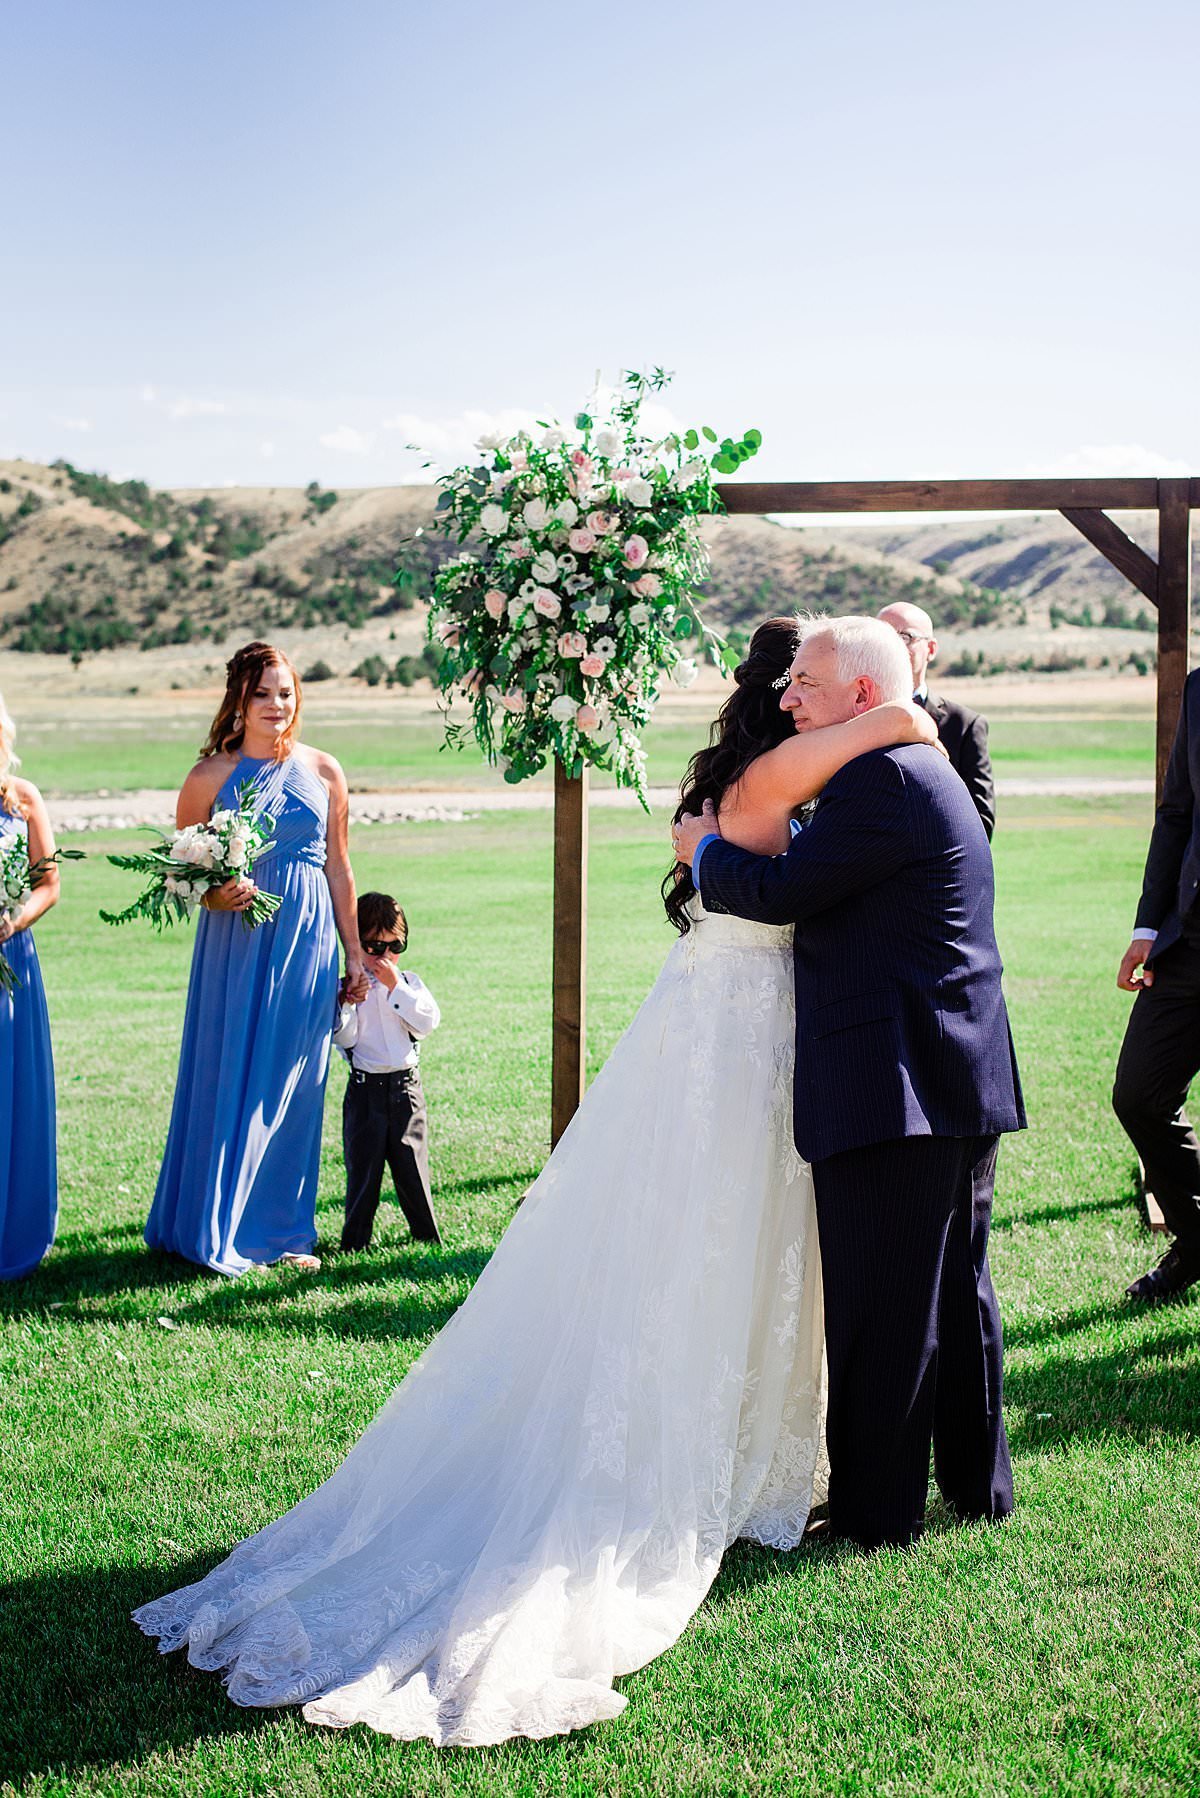 Father of the bride hugging her dad as he gives her away on her wedding day